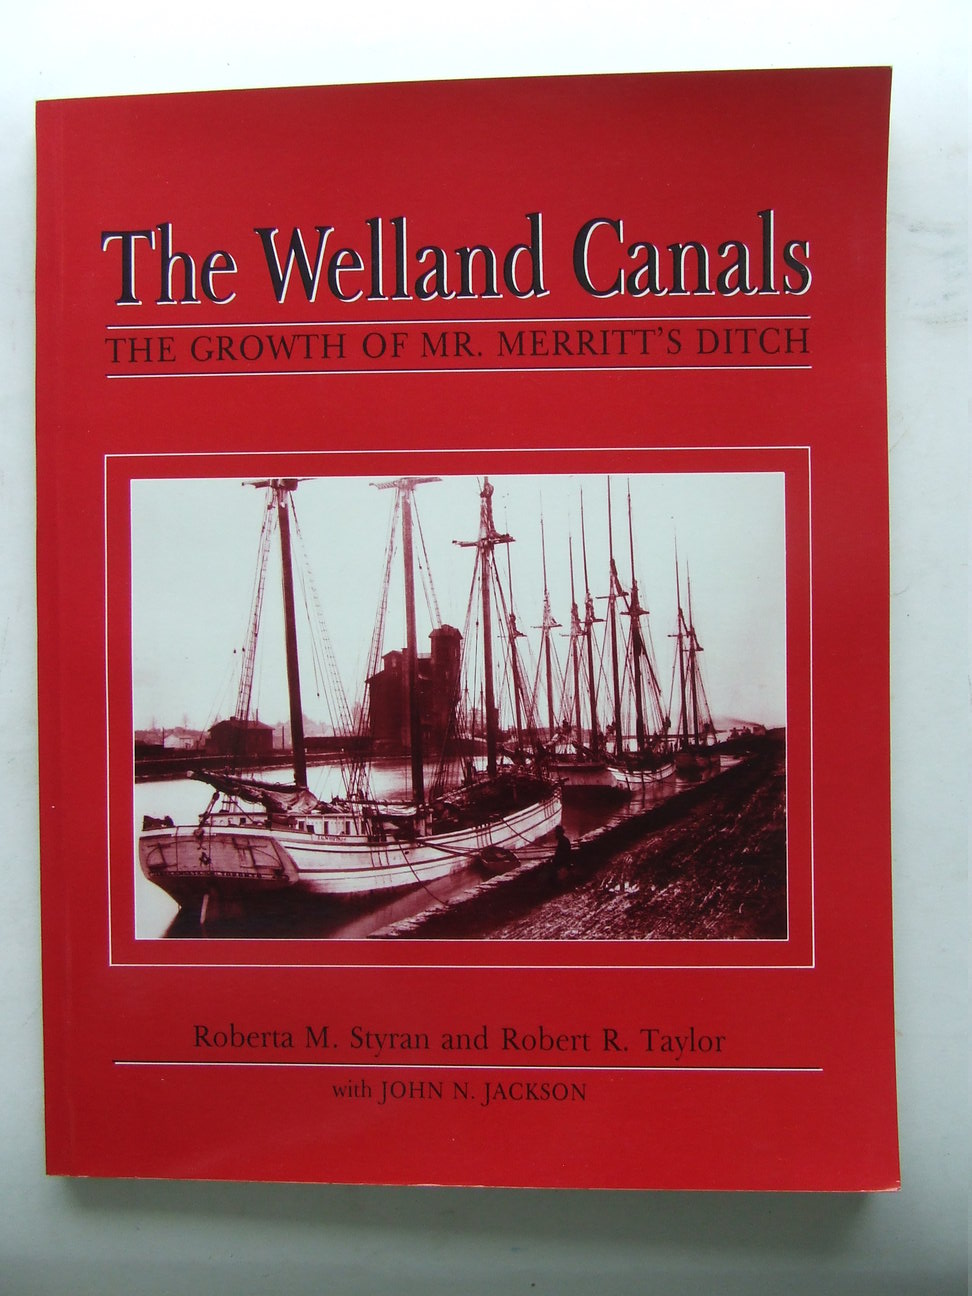 The Welland Canals, the growth of Mr. Merritt's ditch